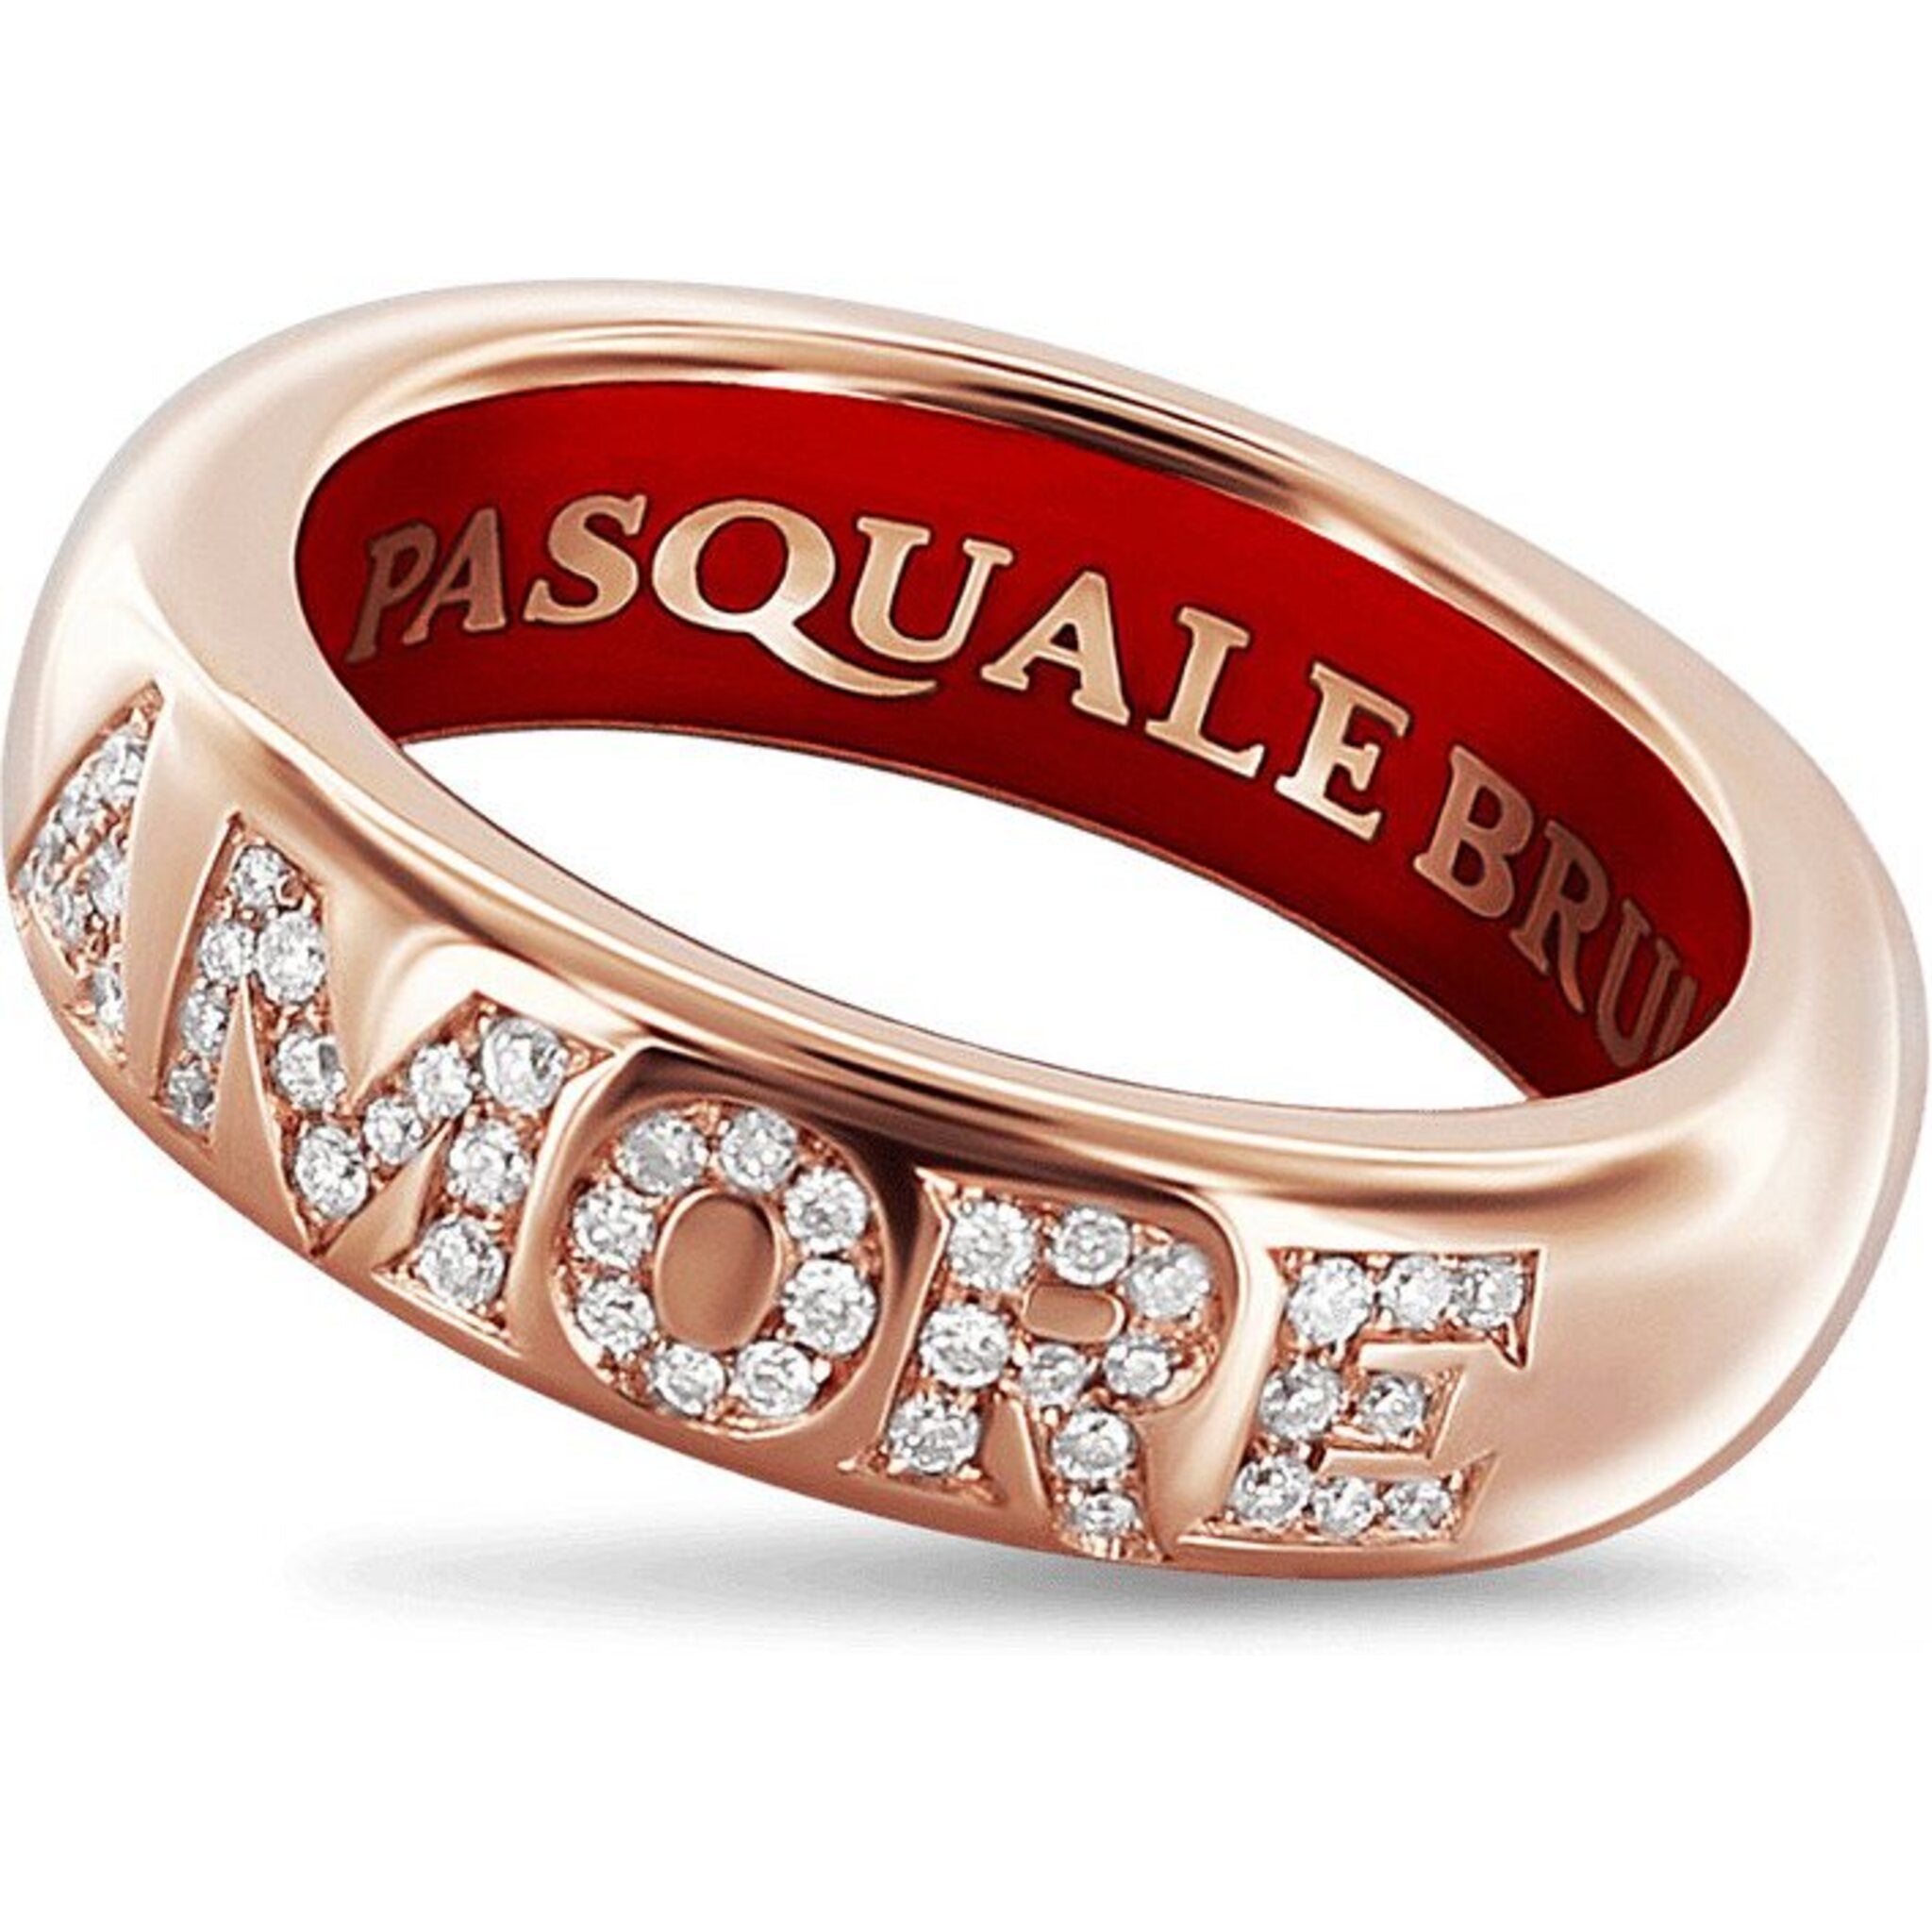 Pasquale Bruni - Amore Small Band Ring in 18k Rose Gold with White Dia –  Robinson's Jewelers